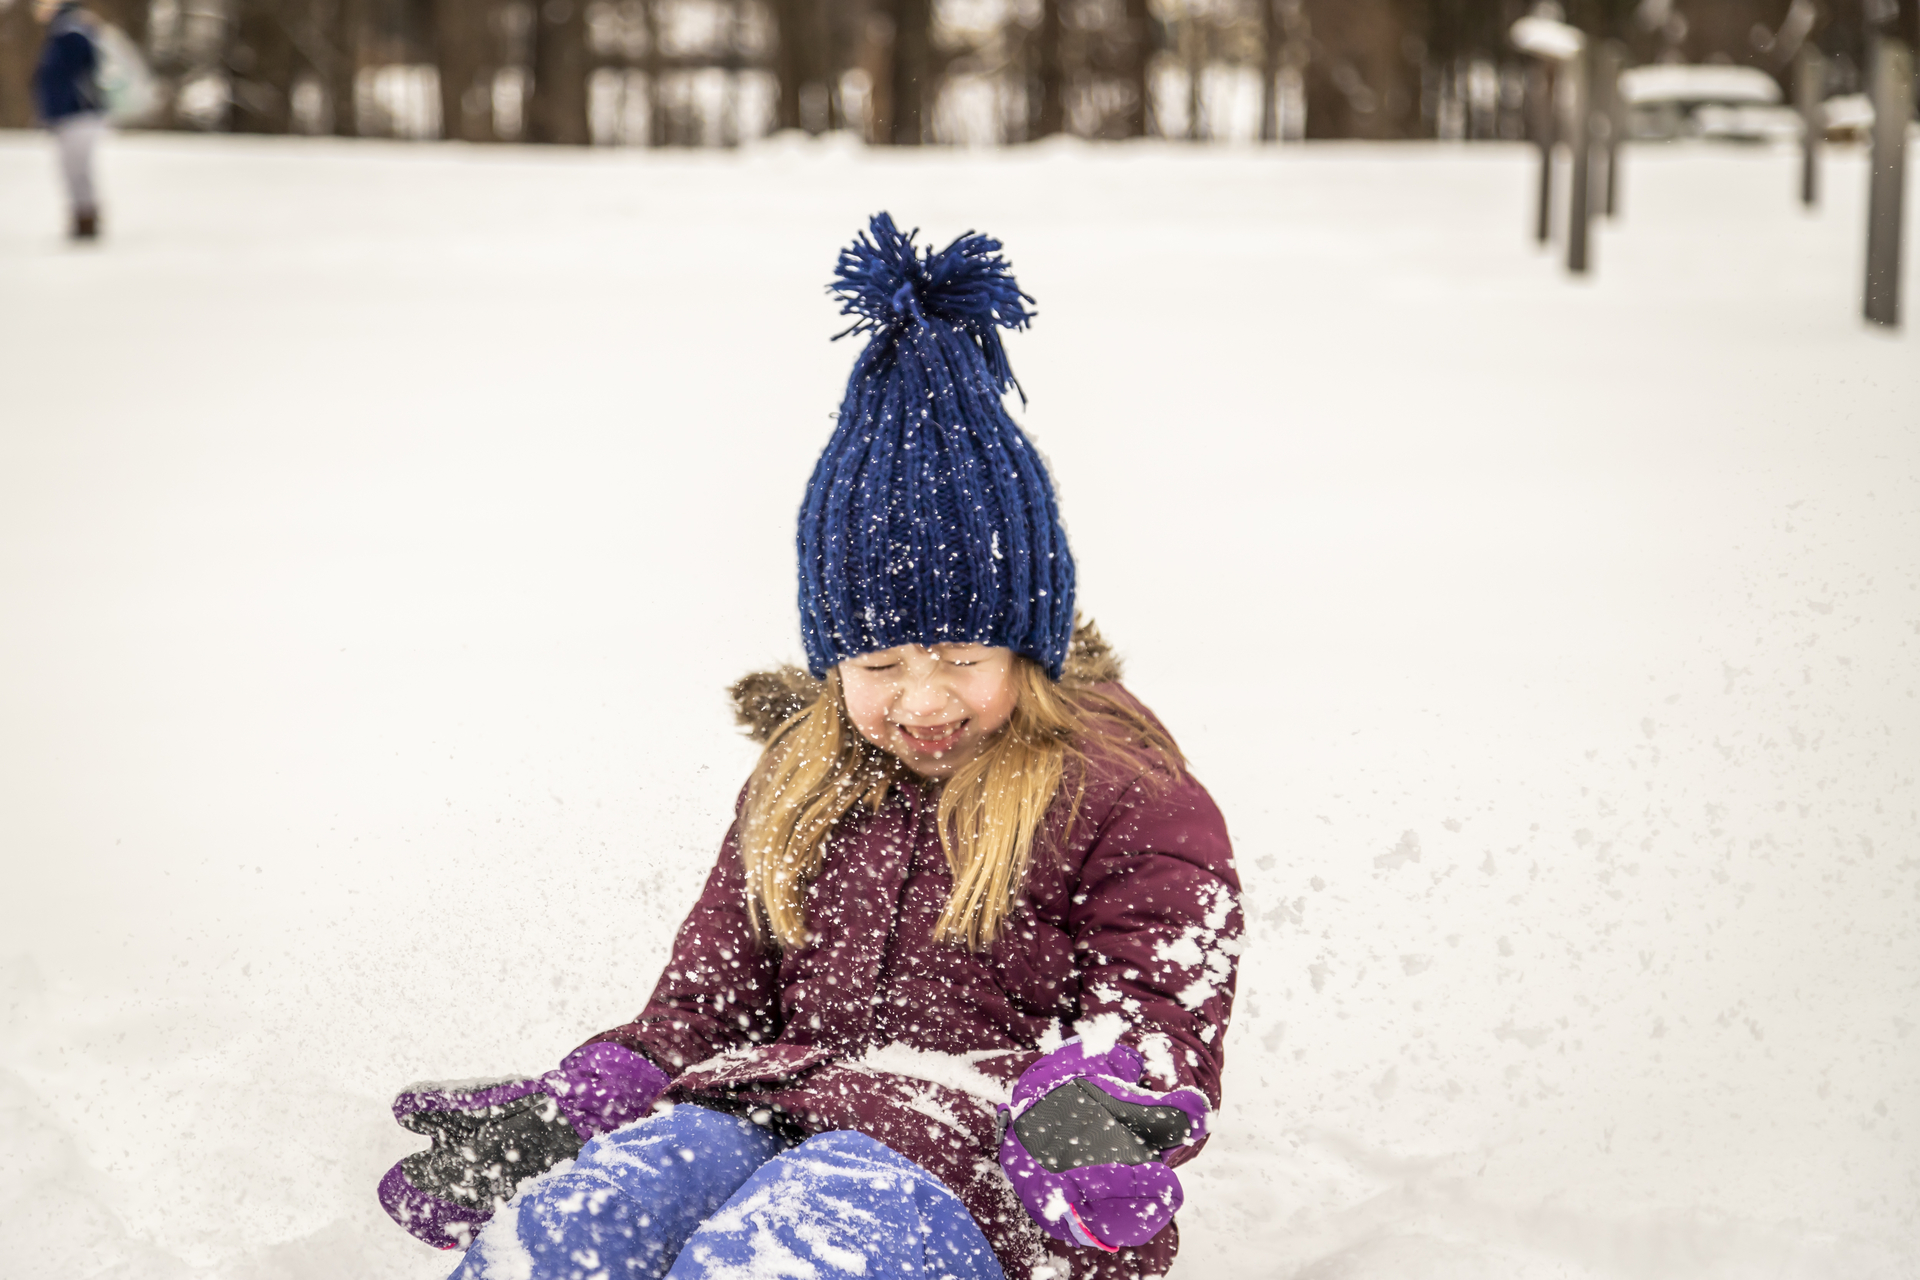 Girl in winter gear throwing snow and smiling